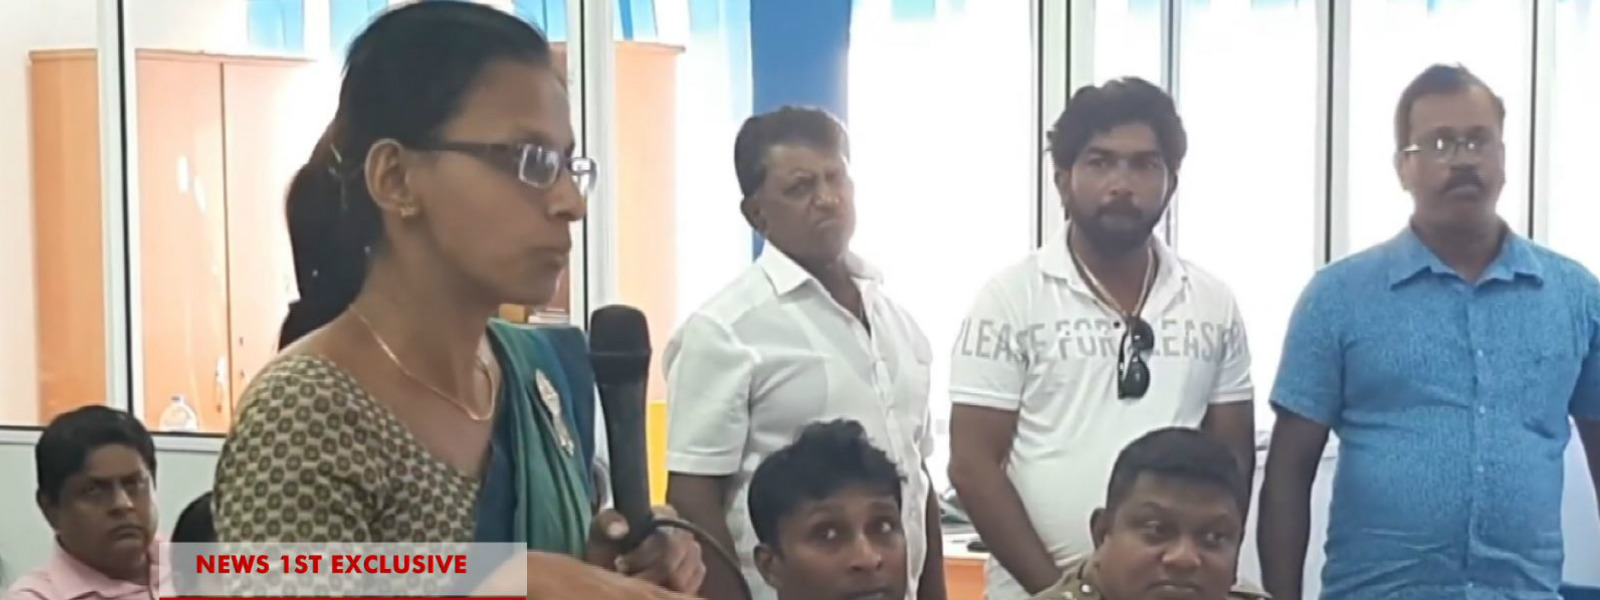 Female state official stands up against the imminent destruction of the Queen’s Isle in Negombo